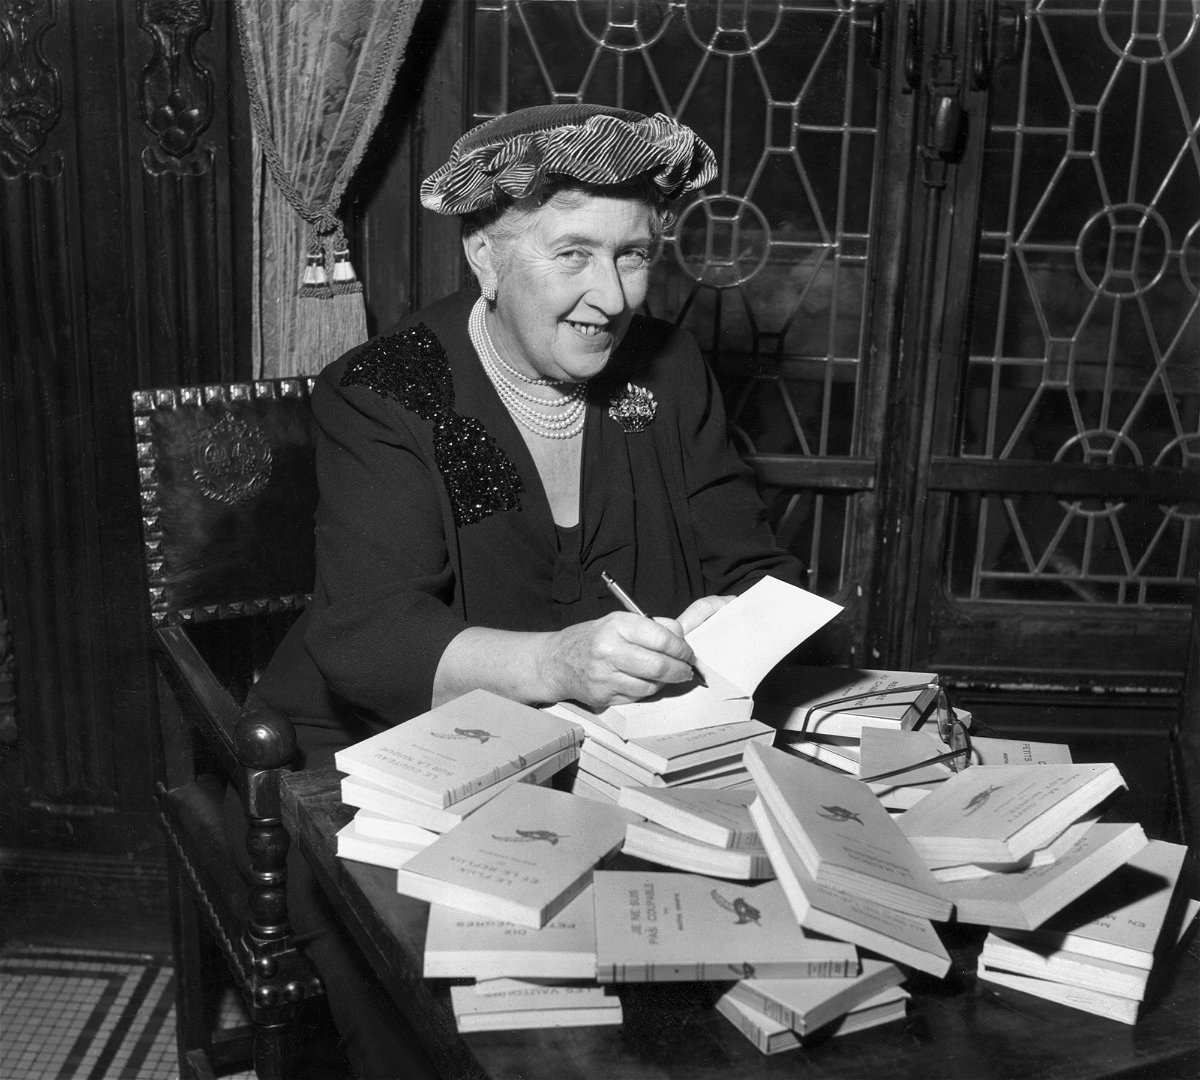 <i>Hulton Archive/Getty Images</i><br/>Agatha Christie signs copies of her books in around 1950. Her works are revised to remove racist references and other language considered offensive to modern audiences.